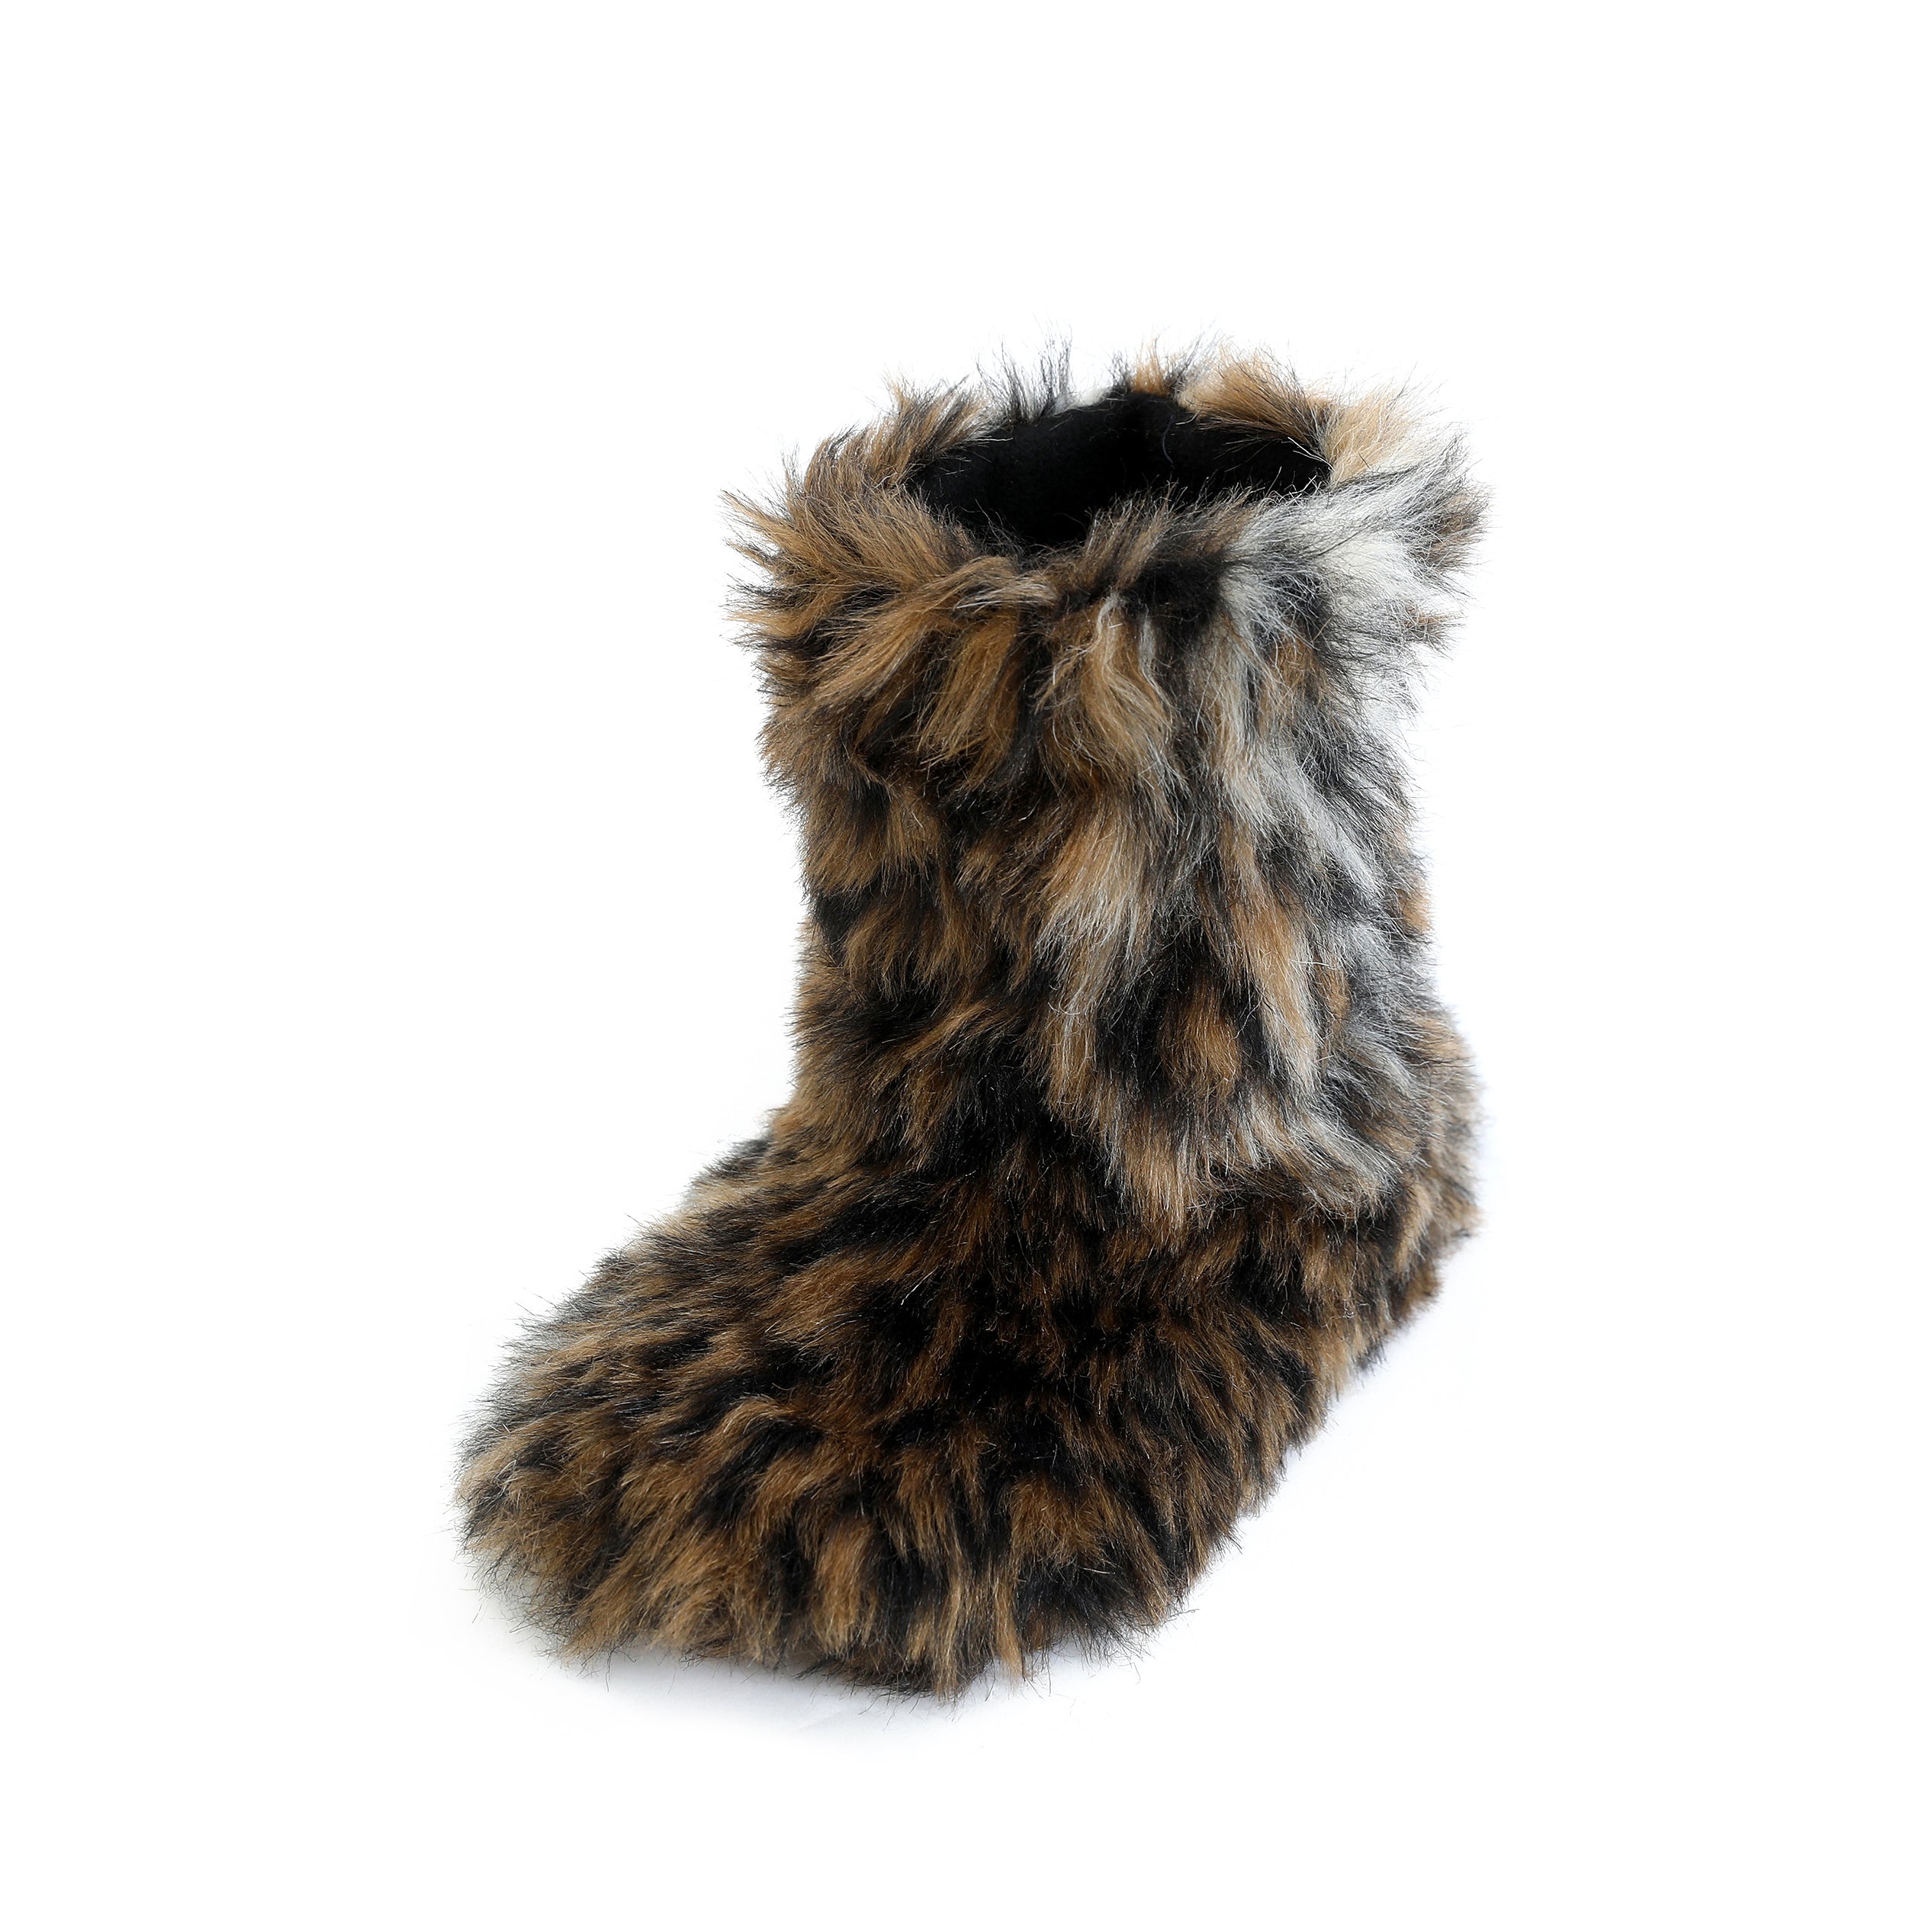 Millffy Winter Warm Women's Faux Fur Bootie Slippers Fuzzy Comfy Plush Boots